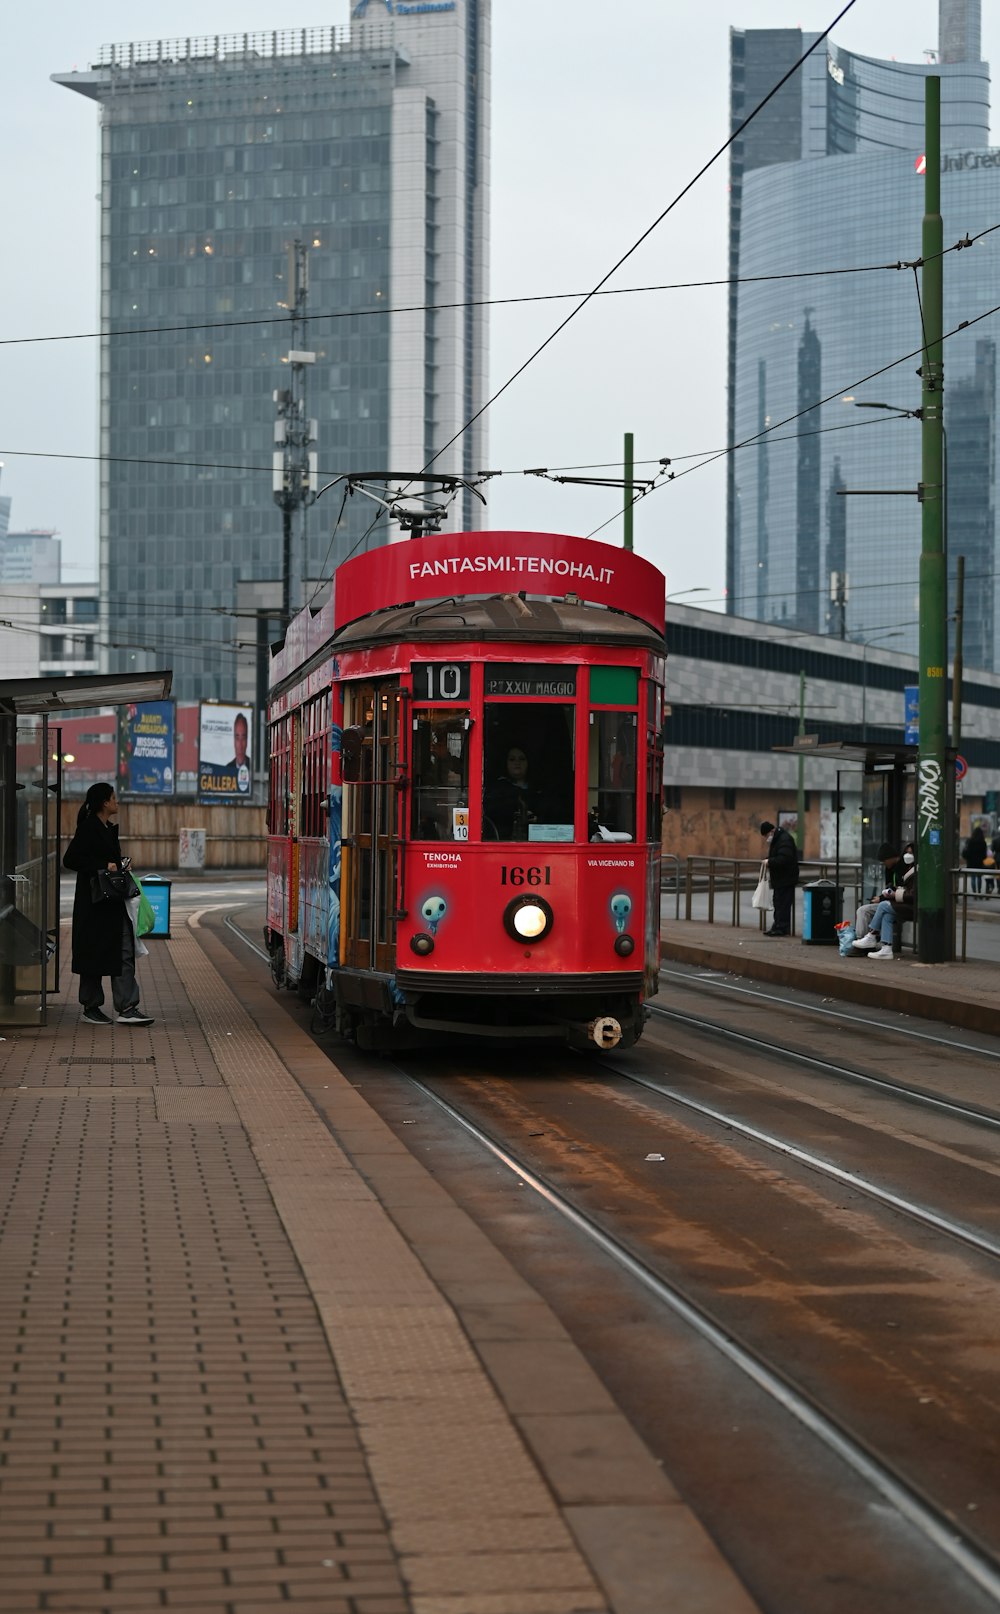 a red trolley is coming down the tracks